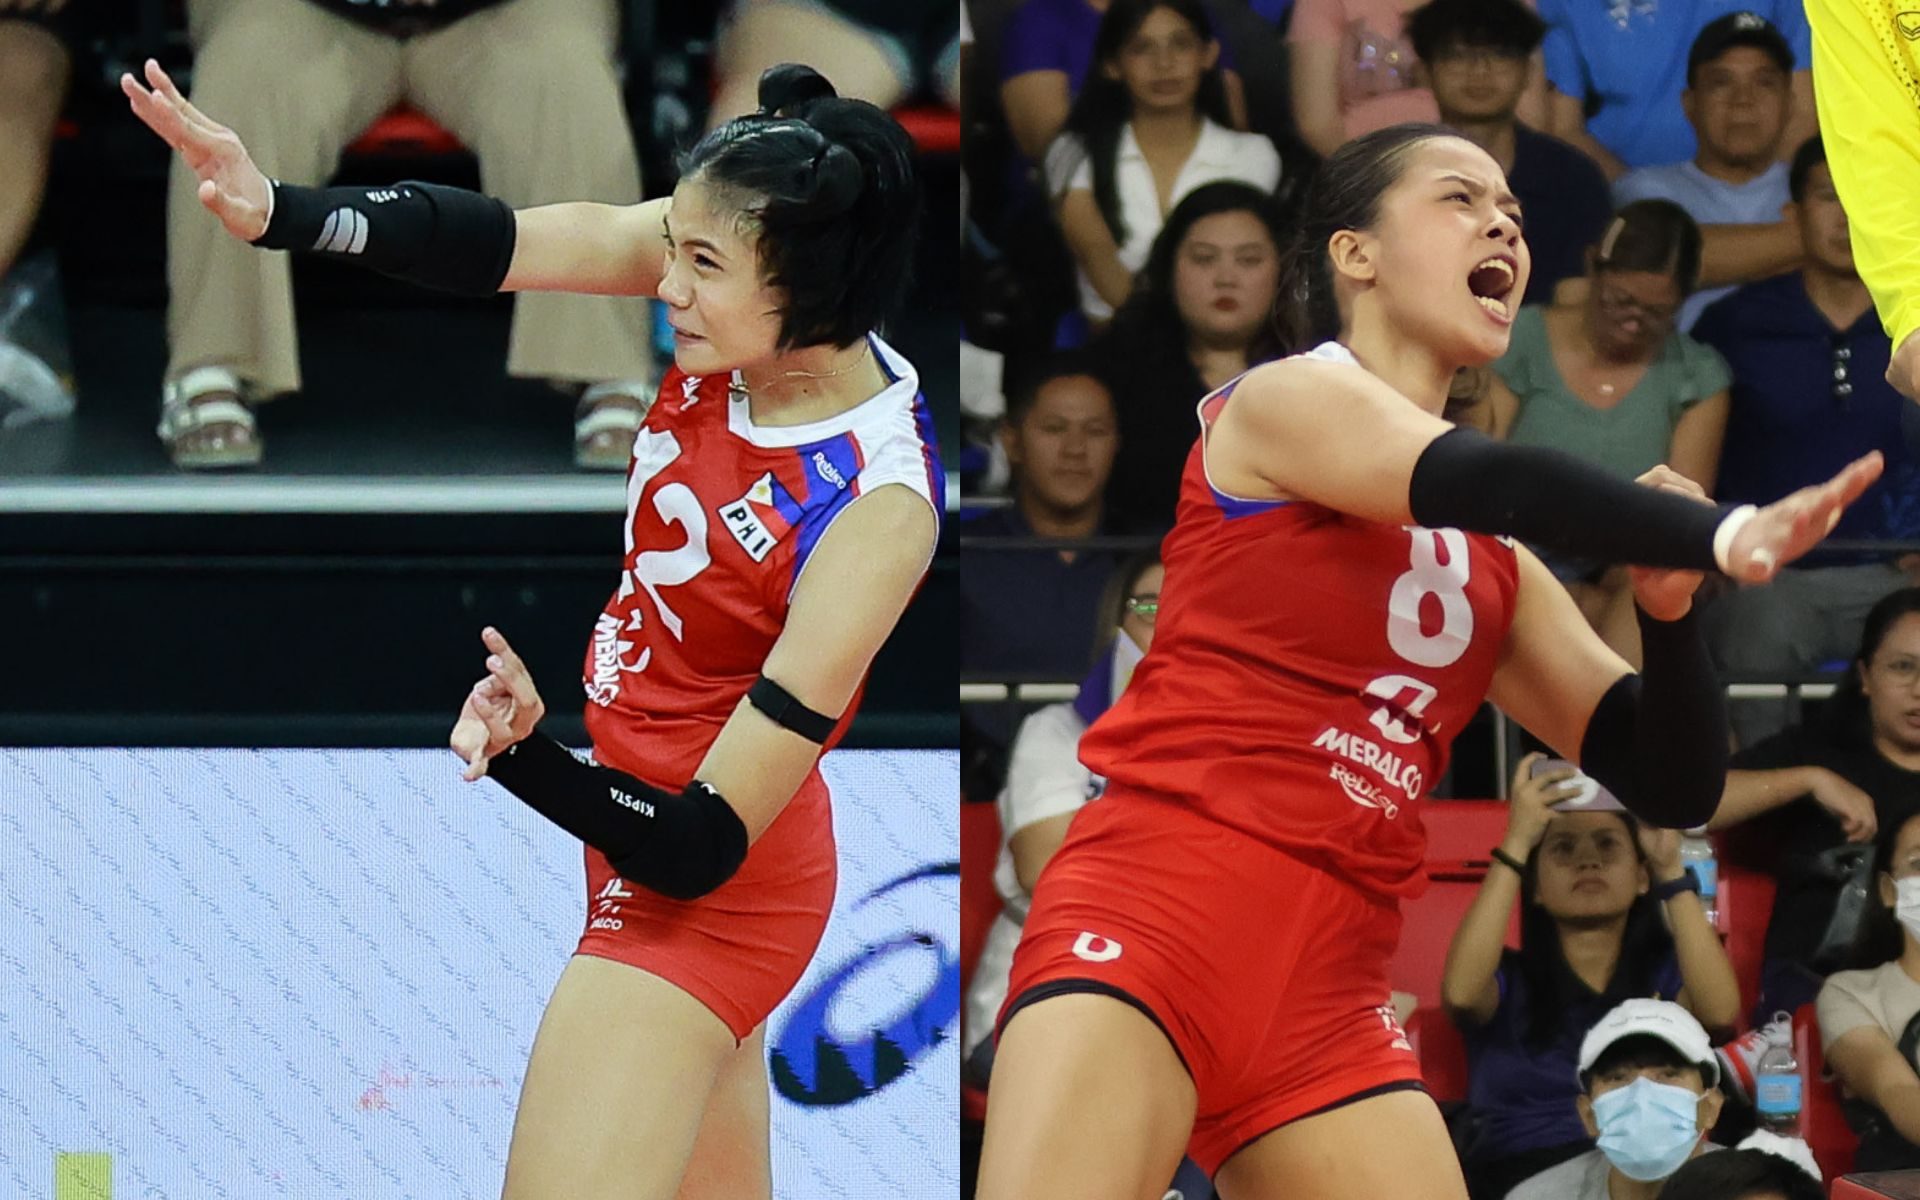 One-two punch: Canino, Laure urge Alas to keep foot on gas amid winning run